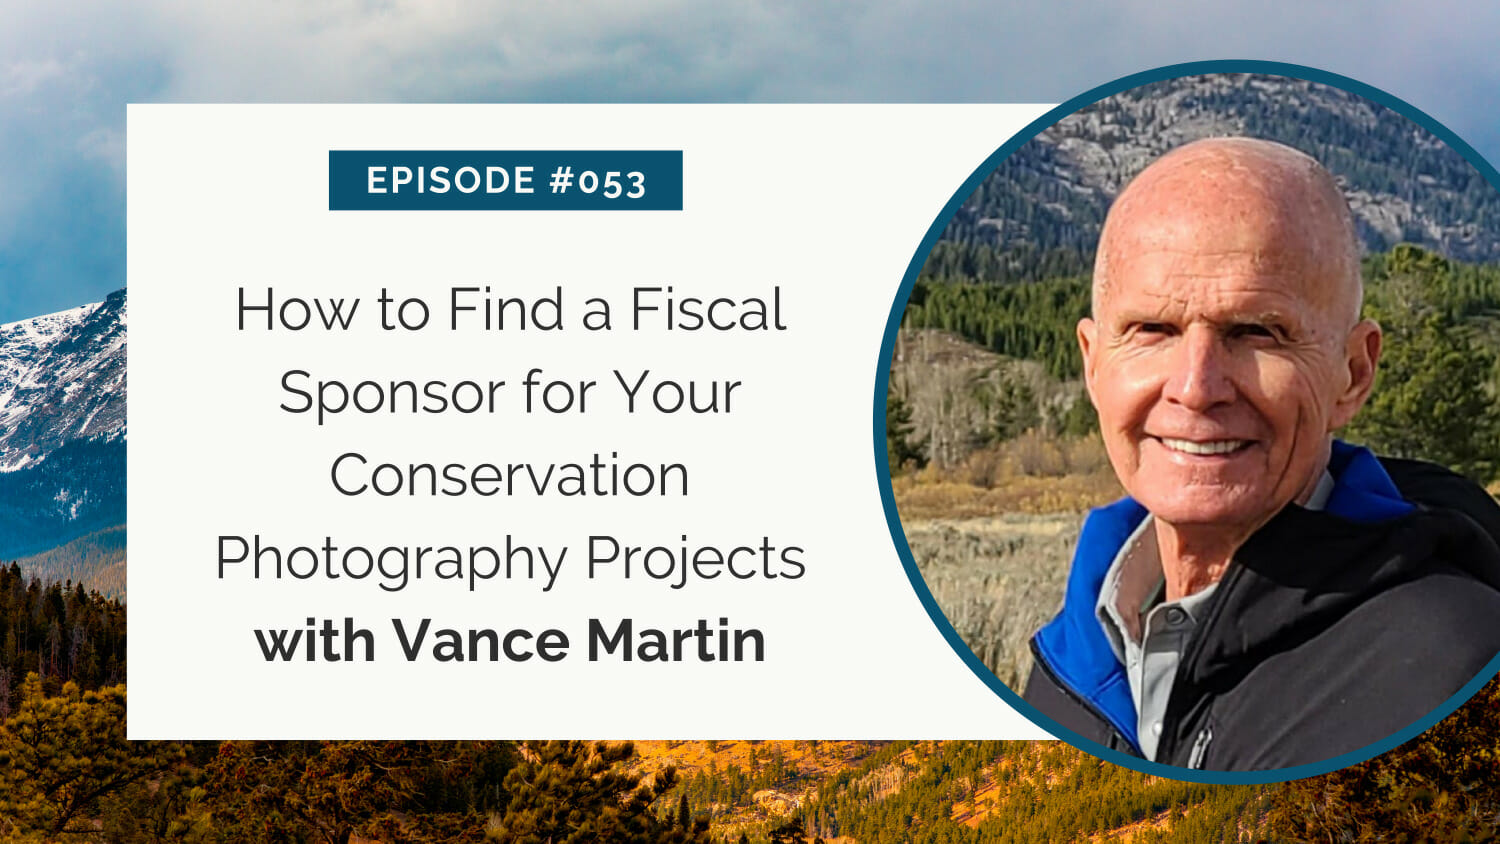 Promotional graphic for episode #053 featuring vance martin discussing how to find a fiscal sponsor for conservation photography projects, set against a backdrop of snowy mountains.